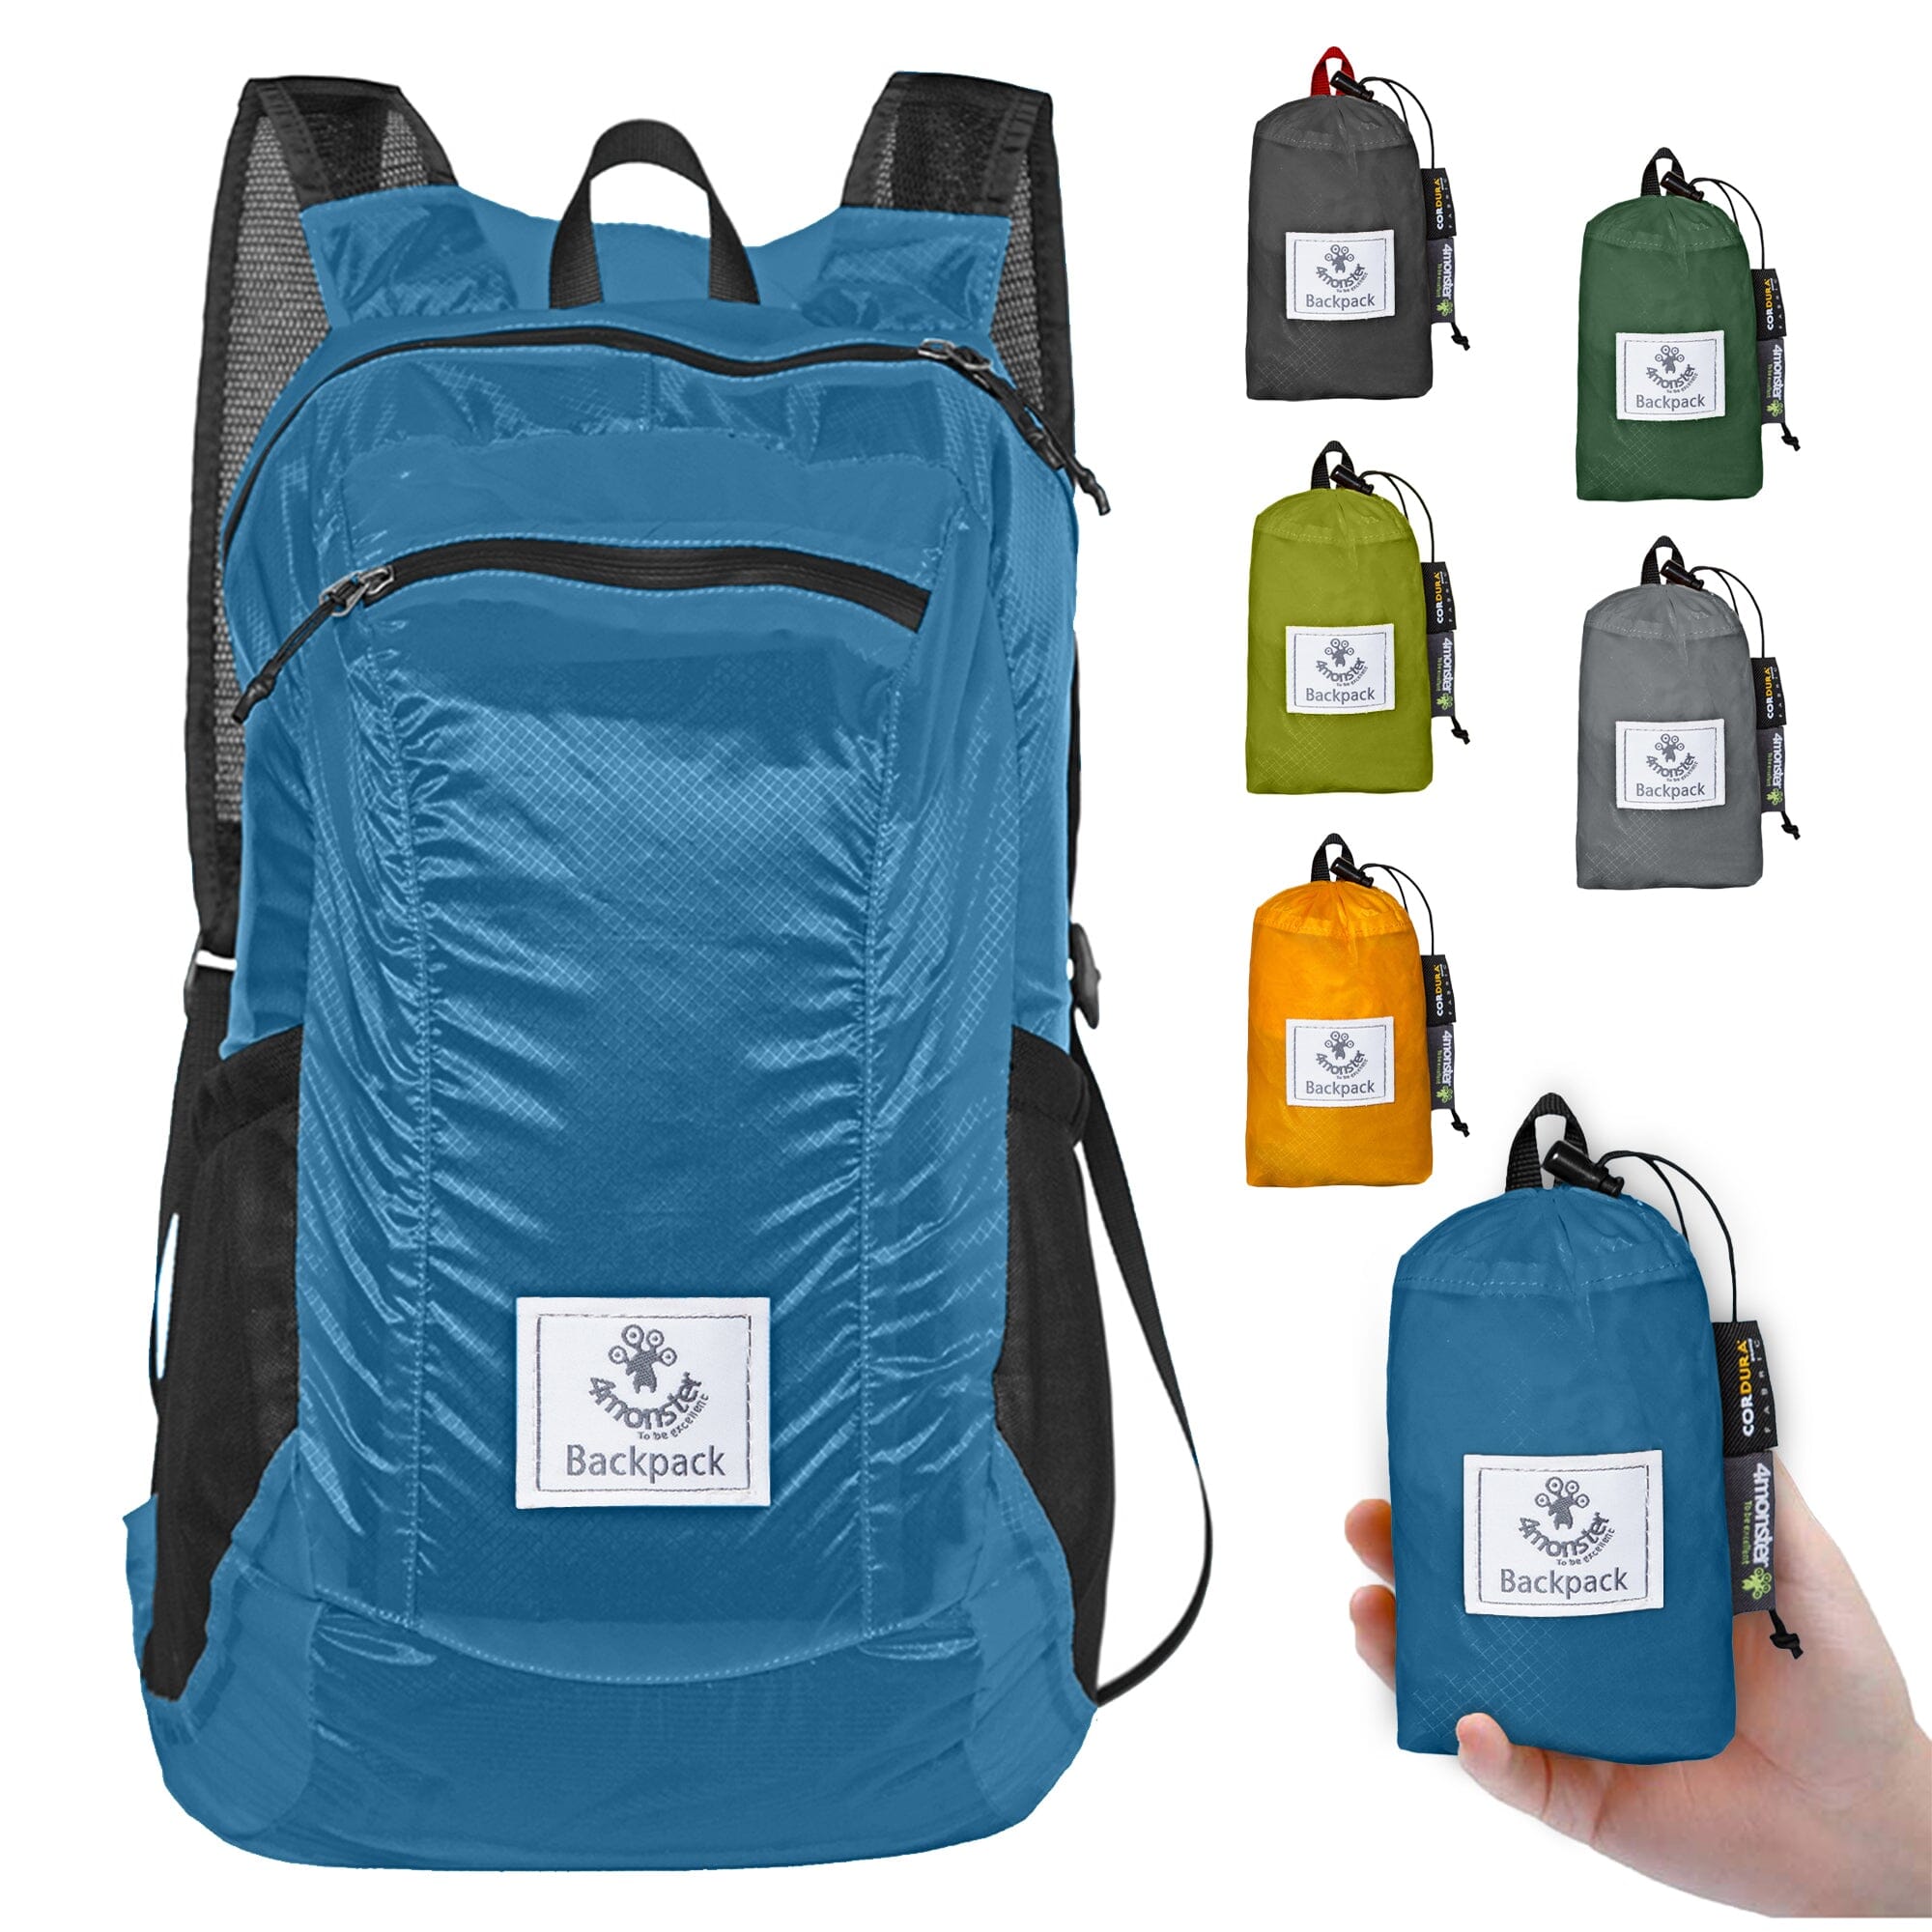 Lightweight Packable Backpack with Pocket Durable Travel Hiking Camping  Outdoor